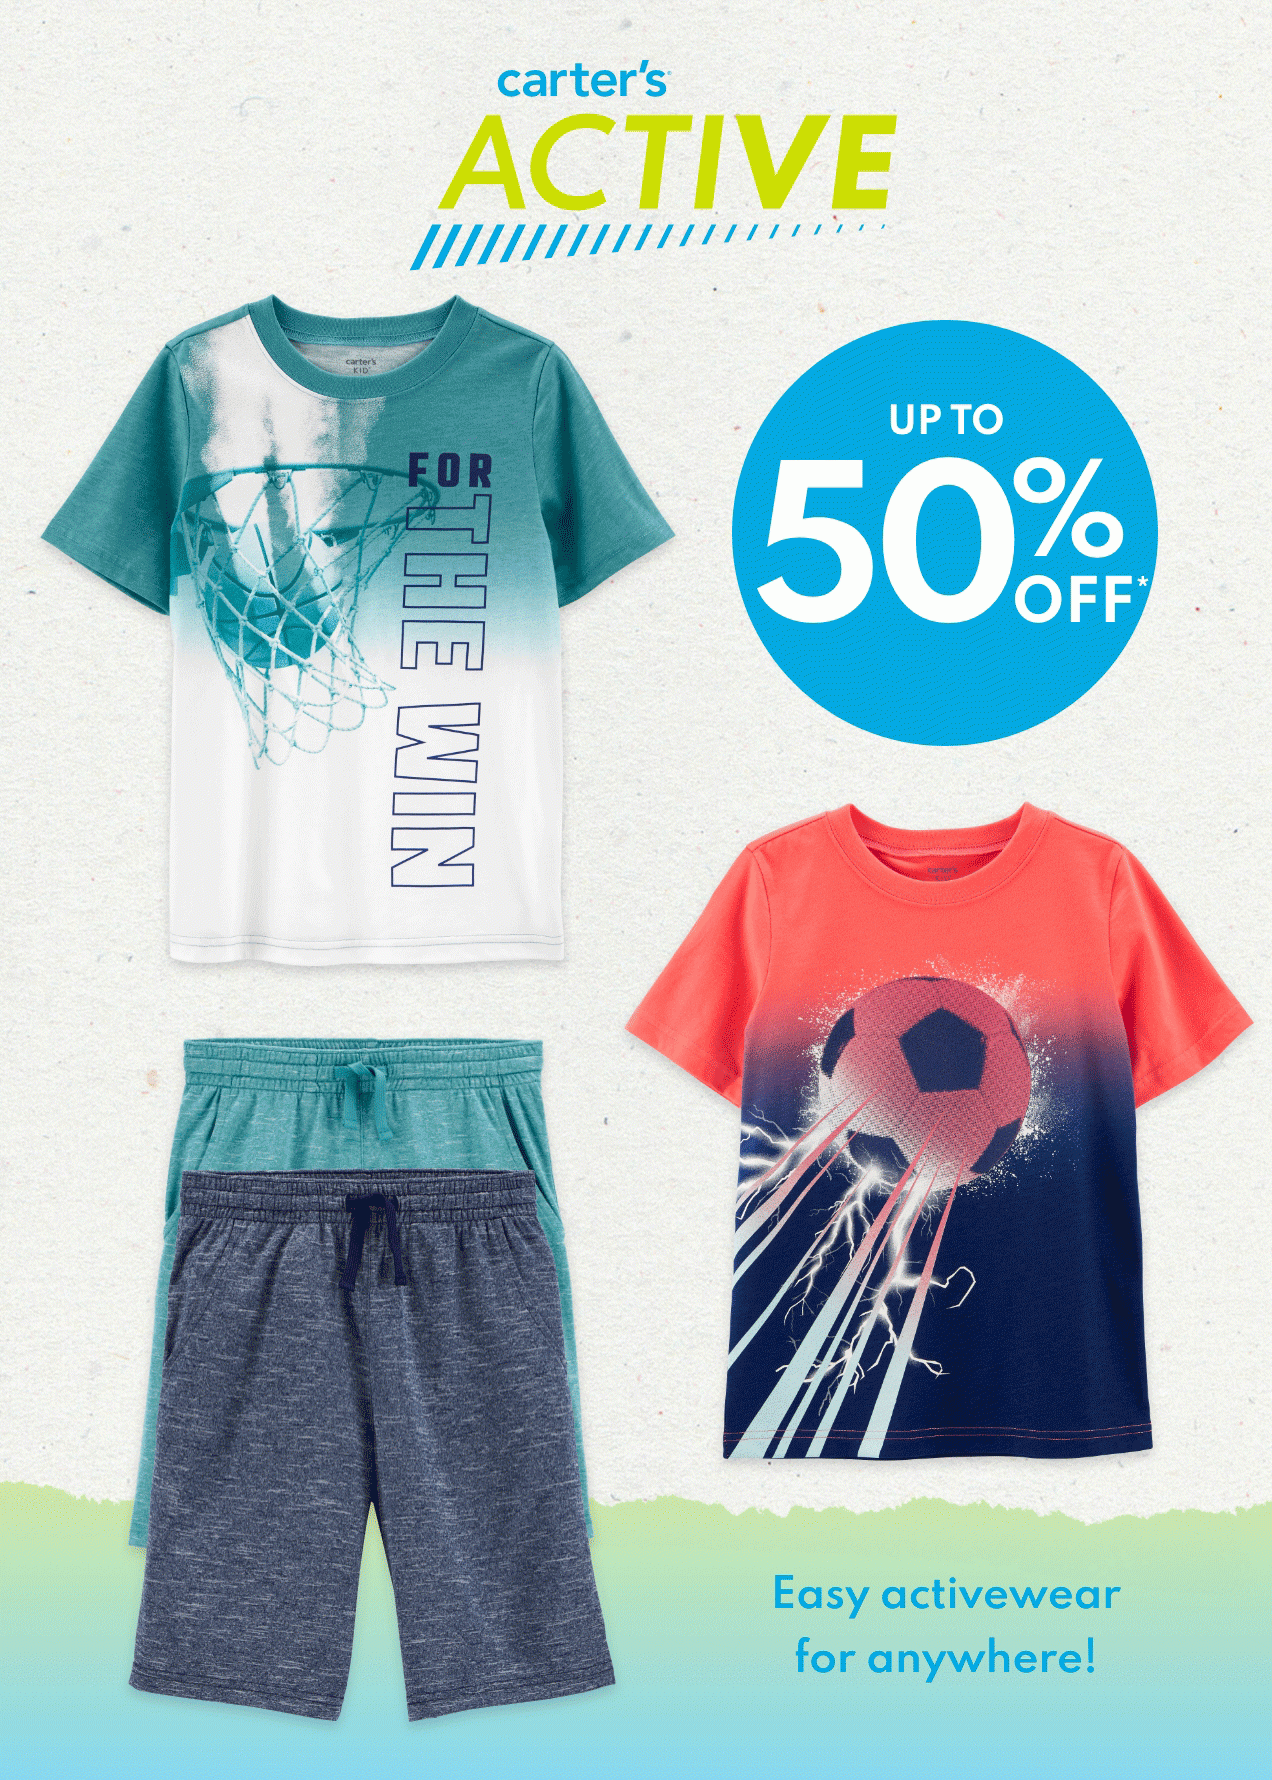 carter's ACTIVE | UP TO 50% OFF* | Easy activewear for anywhere!